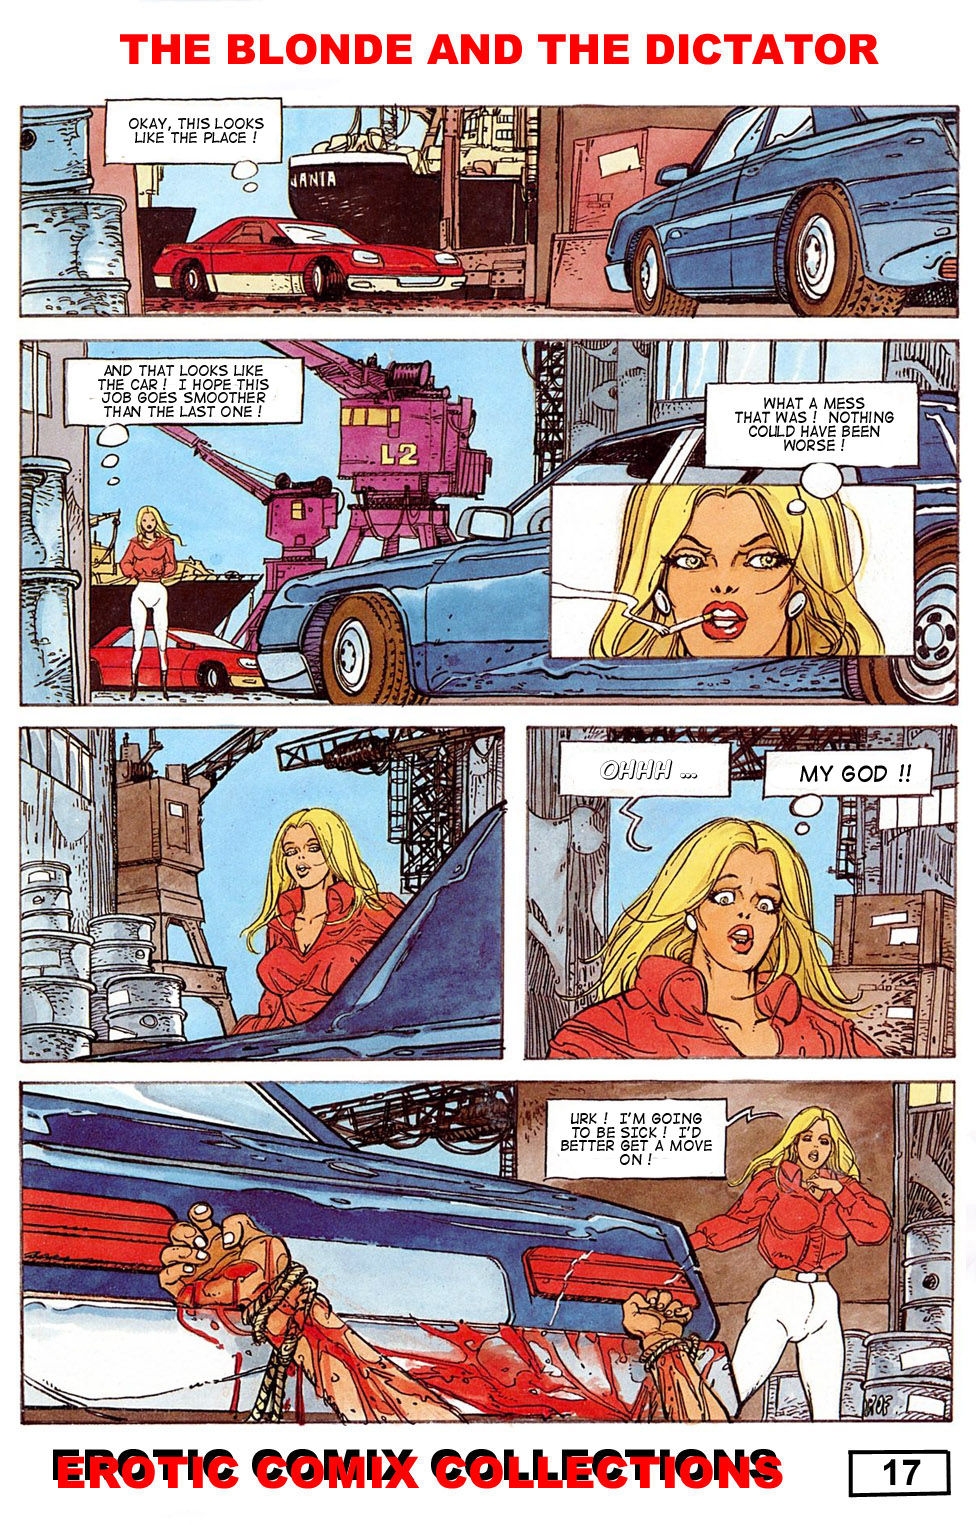 CHARLIE LOGAN #2 - THE BLONDE AND THE DICTATOR - A MALINVAUD TRANSLATION 18